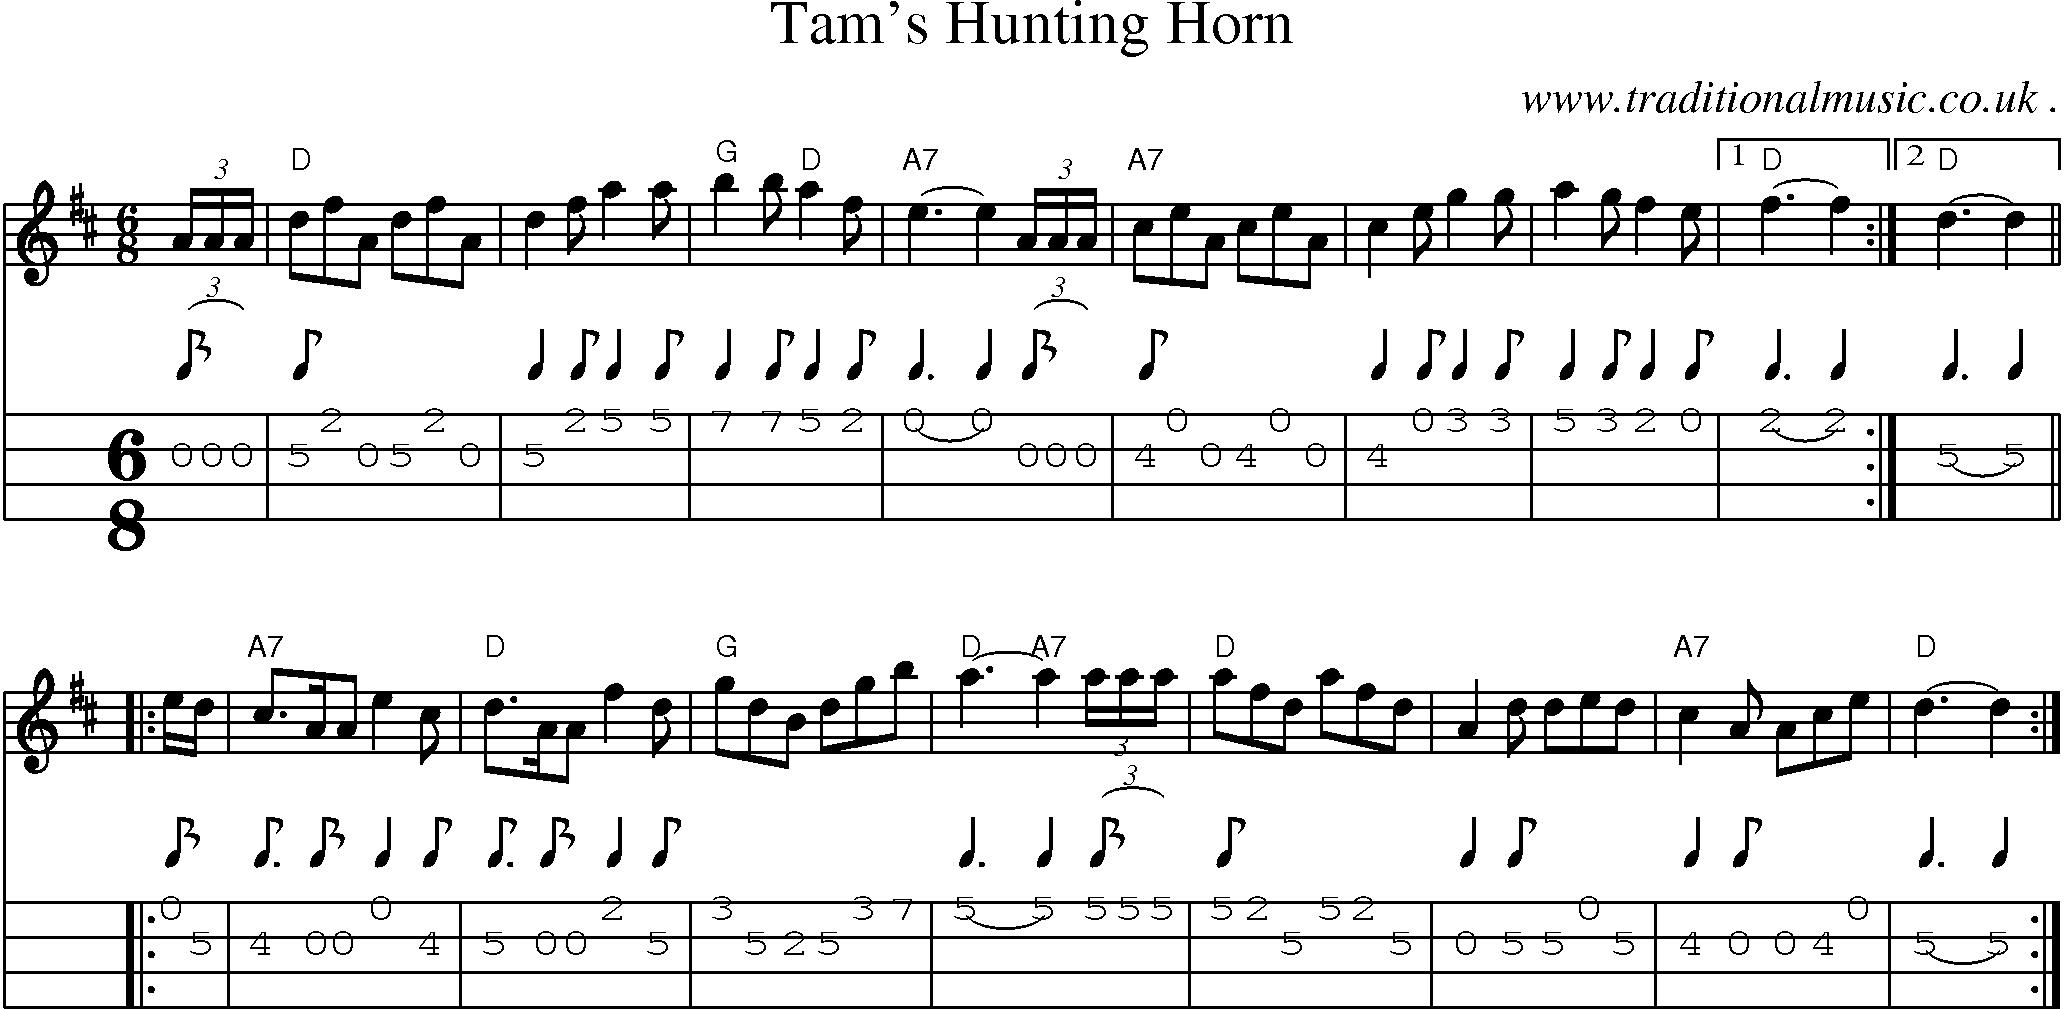 Sheet-music  score, Chords and Mandolin Tabs for Tams Hunting Horn